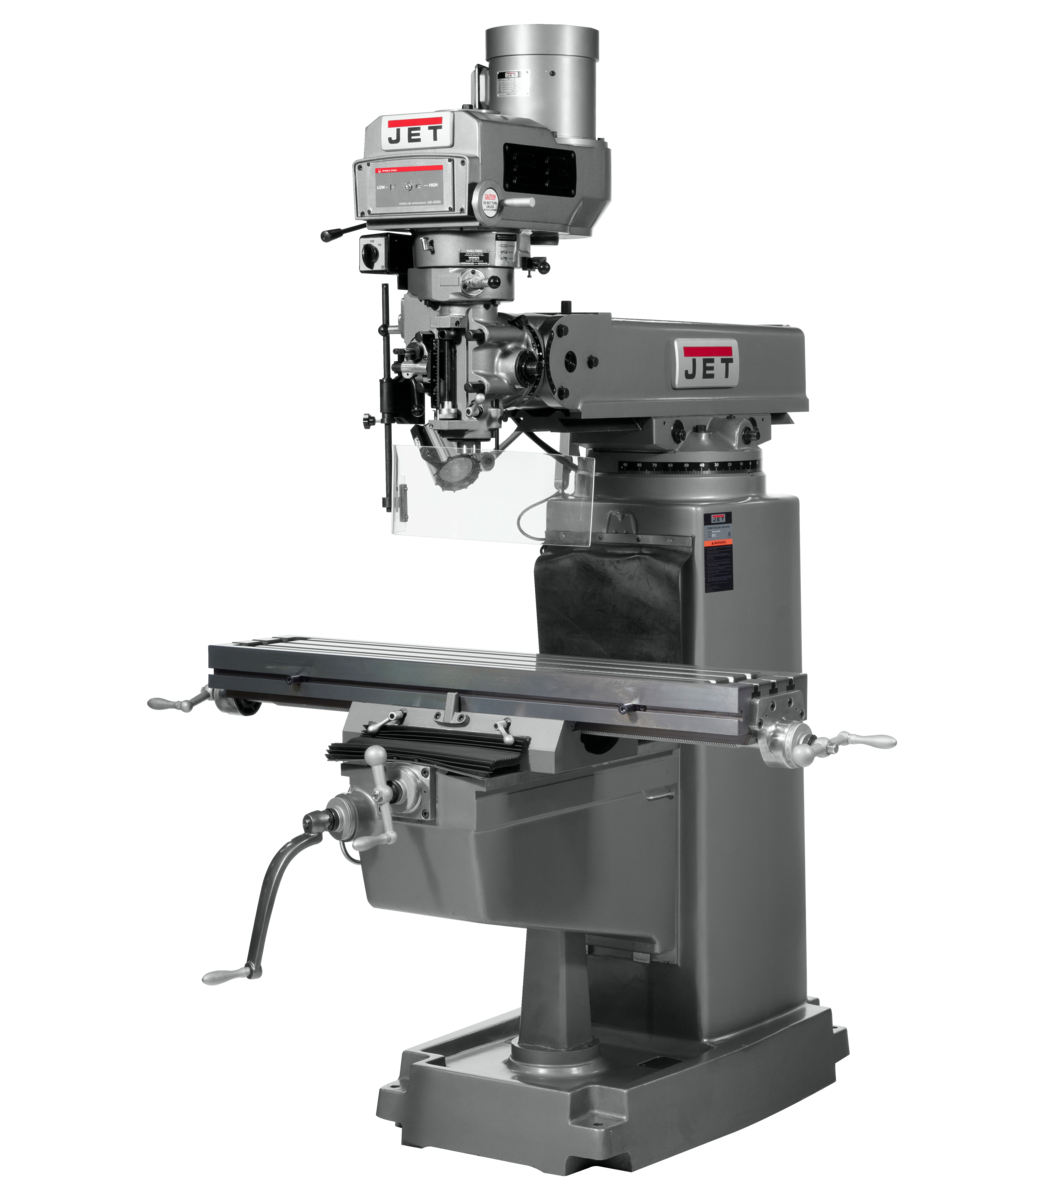 JTM-1050VS2 Mill With 3-Axis ACU-RITE 203S DRO (Knee) With X-Axis Powerfeed